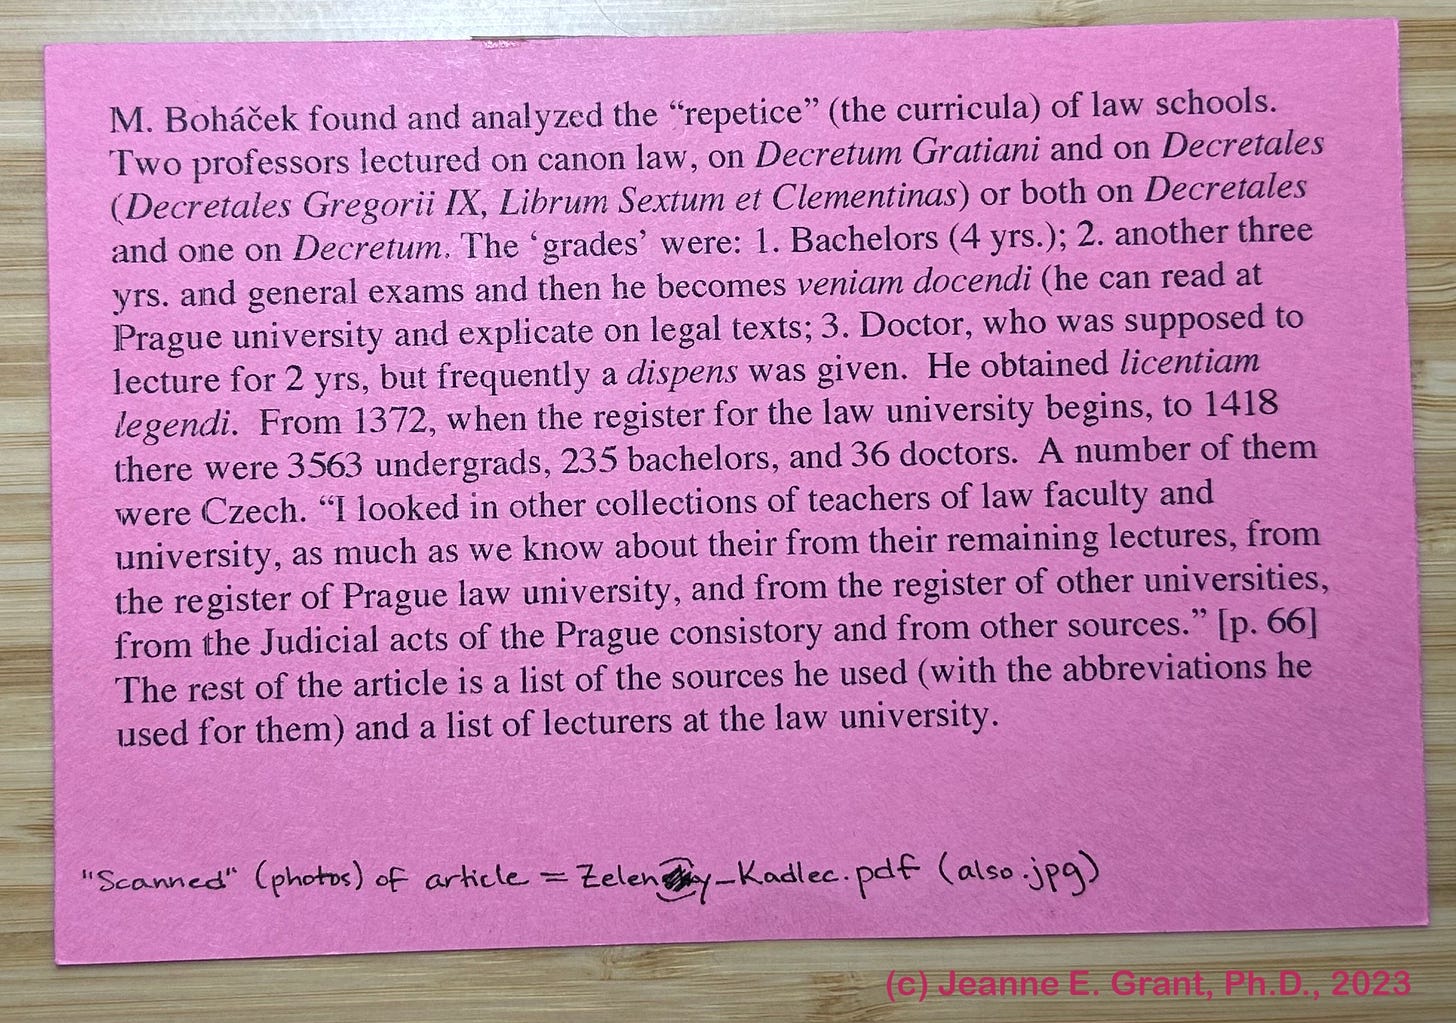 The back side of the same large pink index card for an article in Czech on the law faculty of Charles University, 1349-1419.